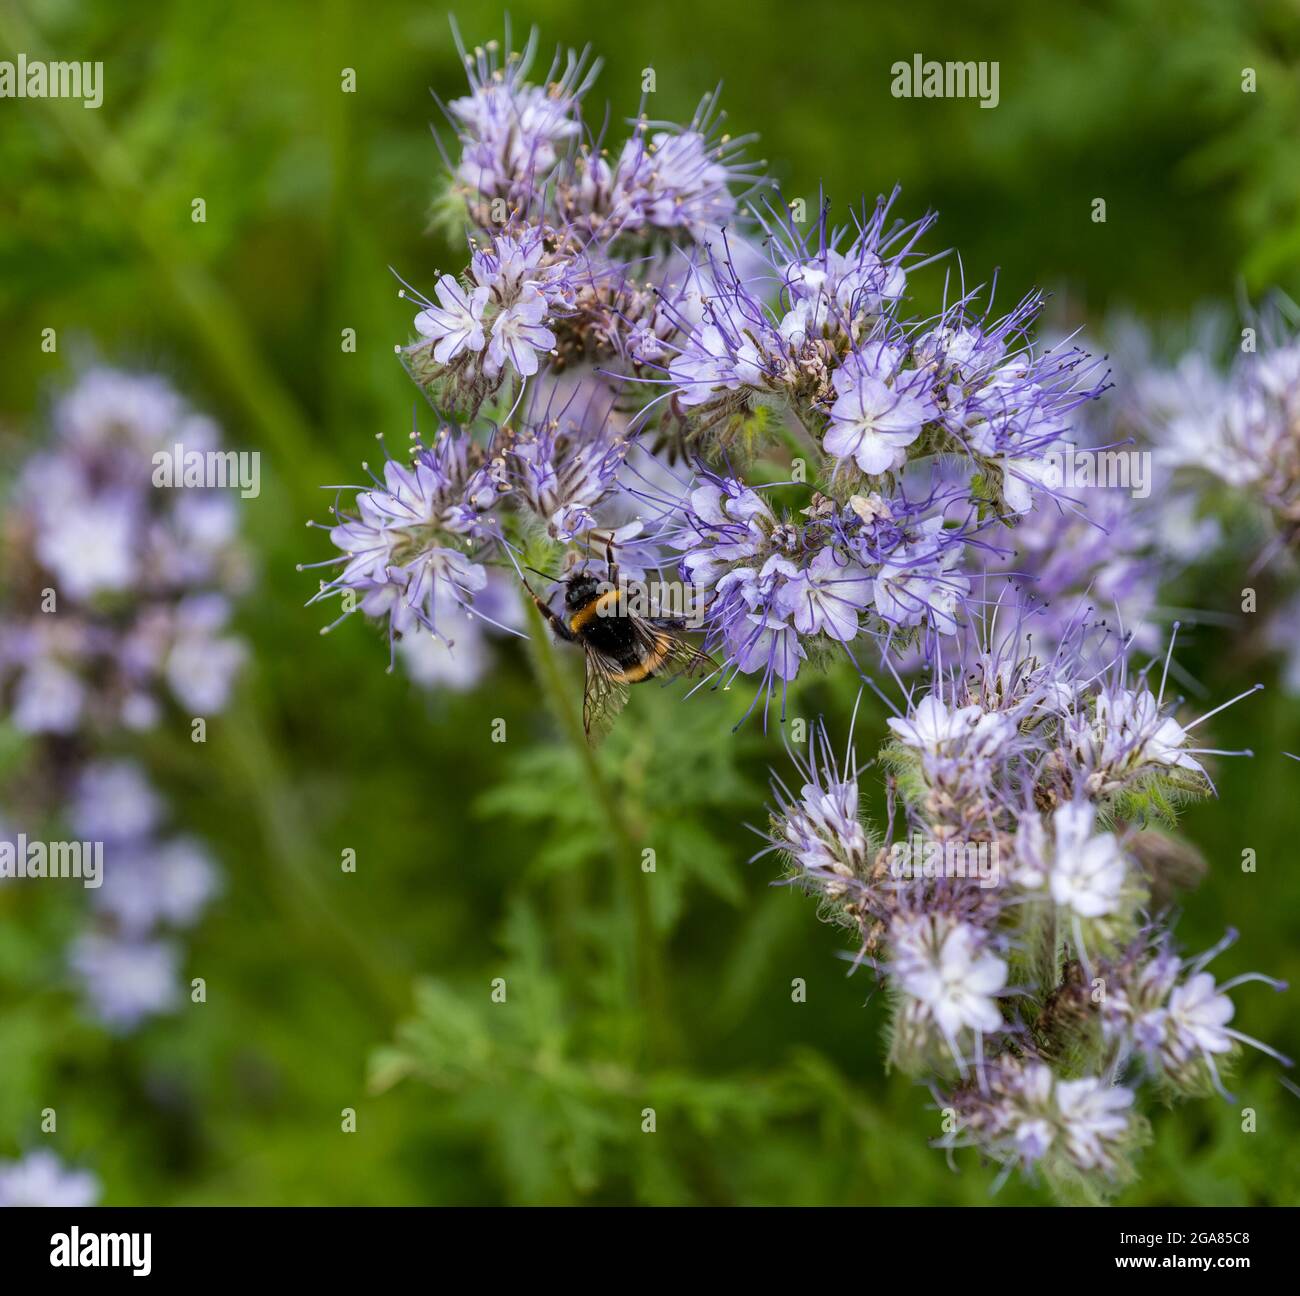 East Lothian, Scotland, United kingdom, 29th July 2021. UK Weather: sunshine on agriculture crops & bees: A crop field is edged by a cover crop of lacy phacelia (Phacelia tanacetifolia) in full bloom, also known as purple or blue tansy, which act as a pollinator attractor. The flowers are alive with buzzing bumblebees Stock Photo